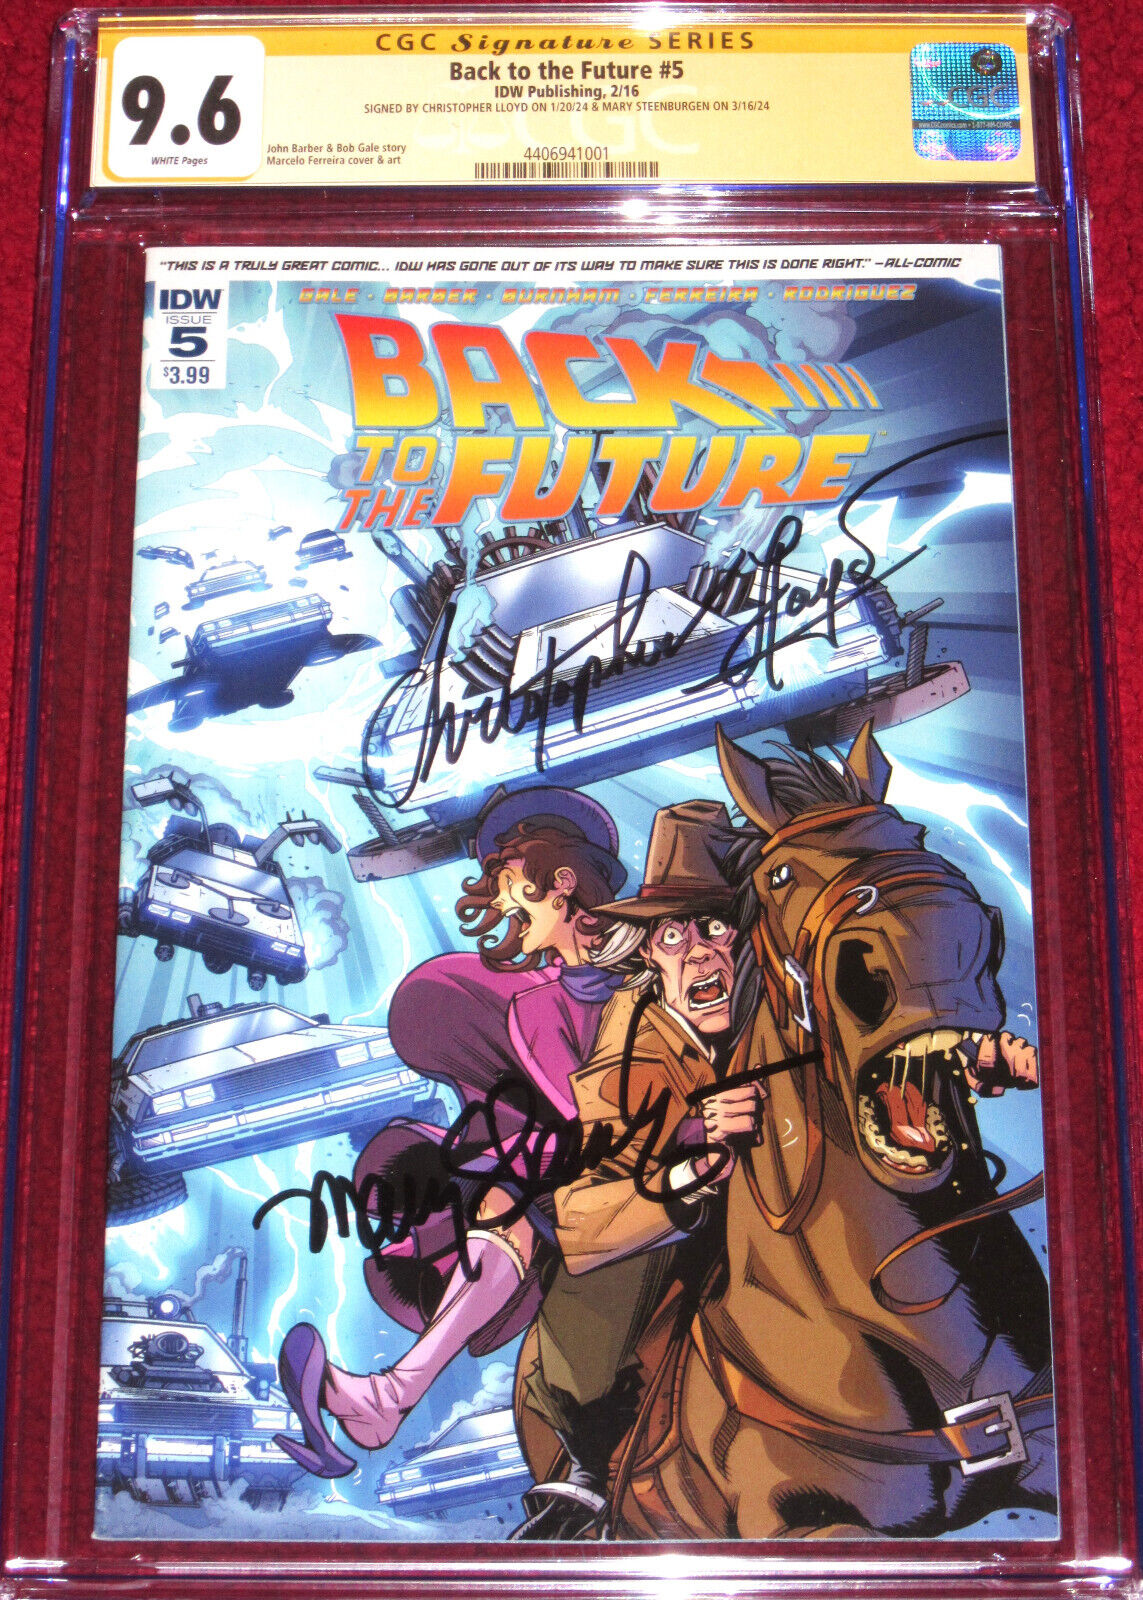 CGC SS Back to the Future issue 5 signed by Christopher Lloyd & Mary Steenburgen